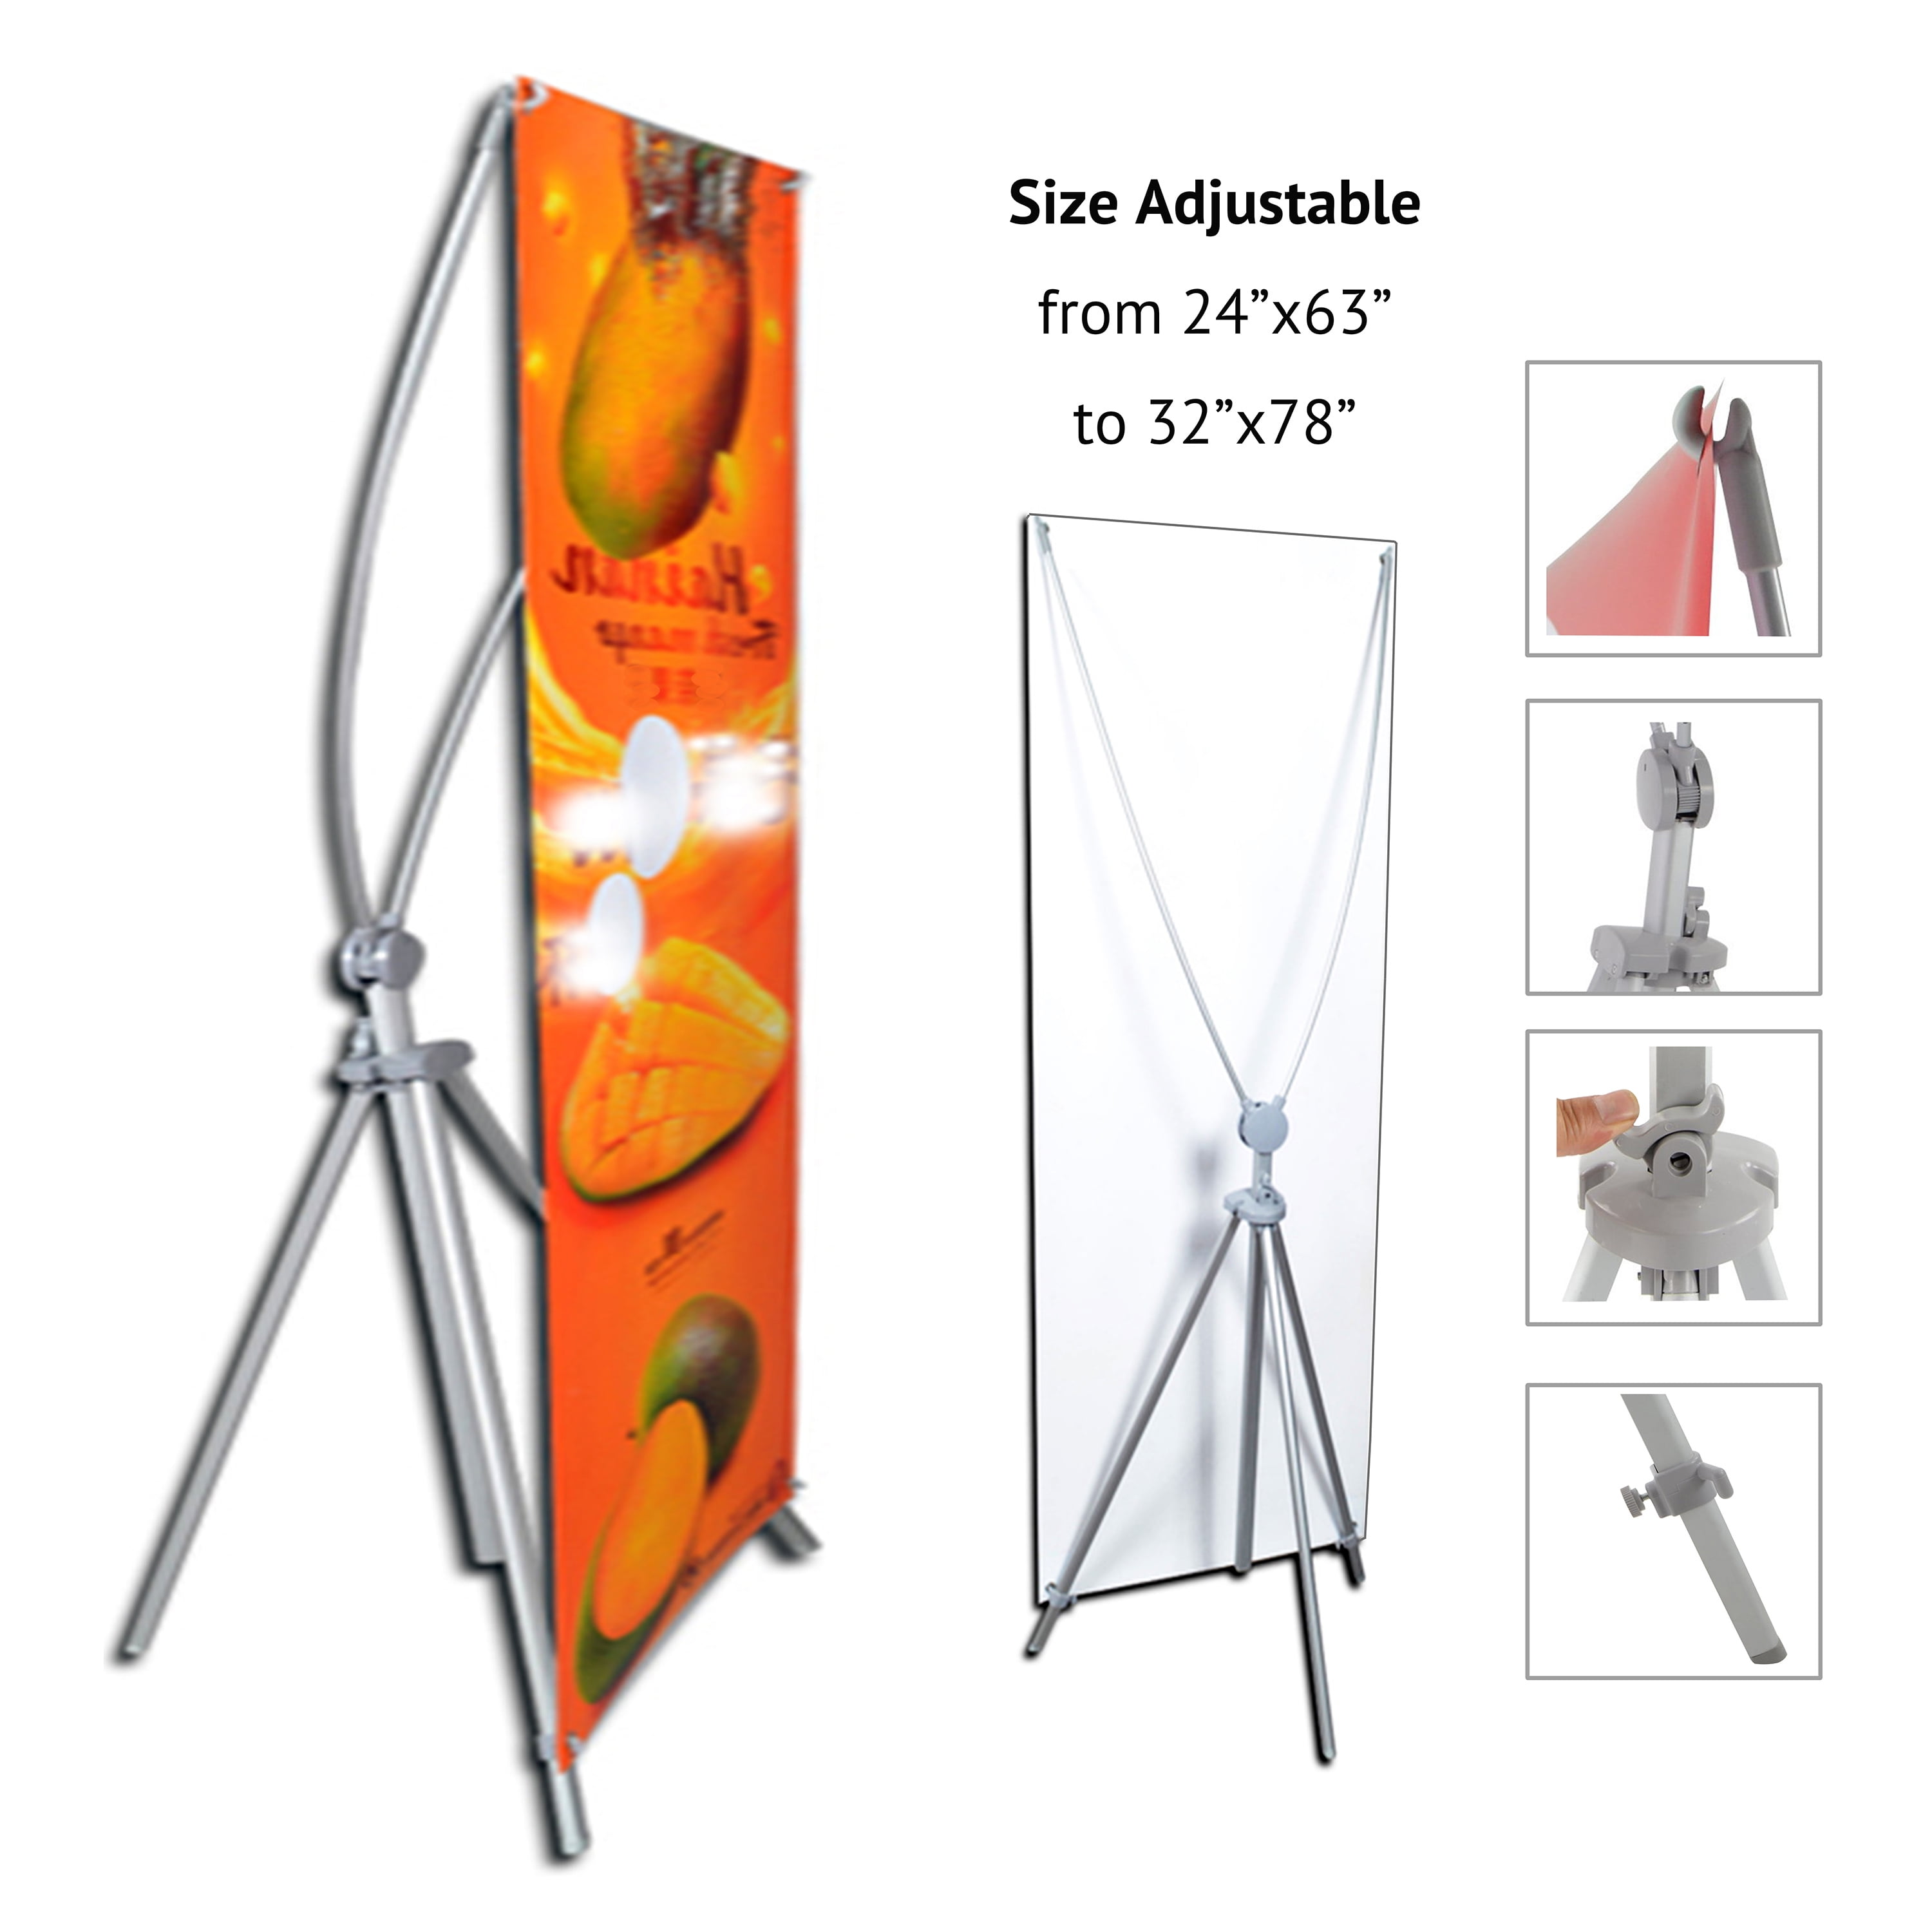 Adjustable Width&Height Details about   US Big Adjustable X Banner Stand Banner Booth Display 